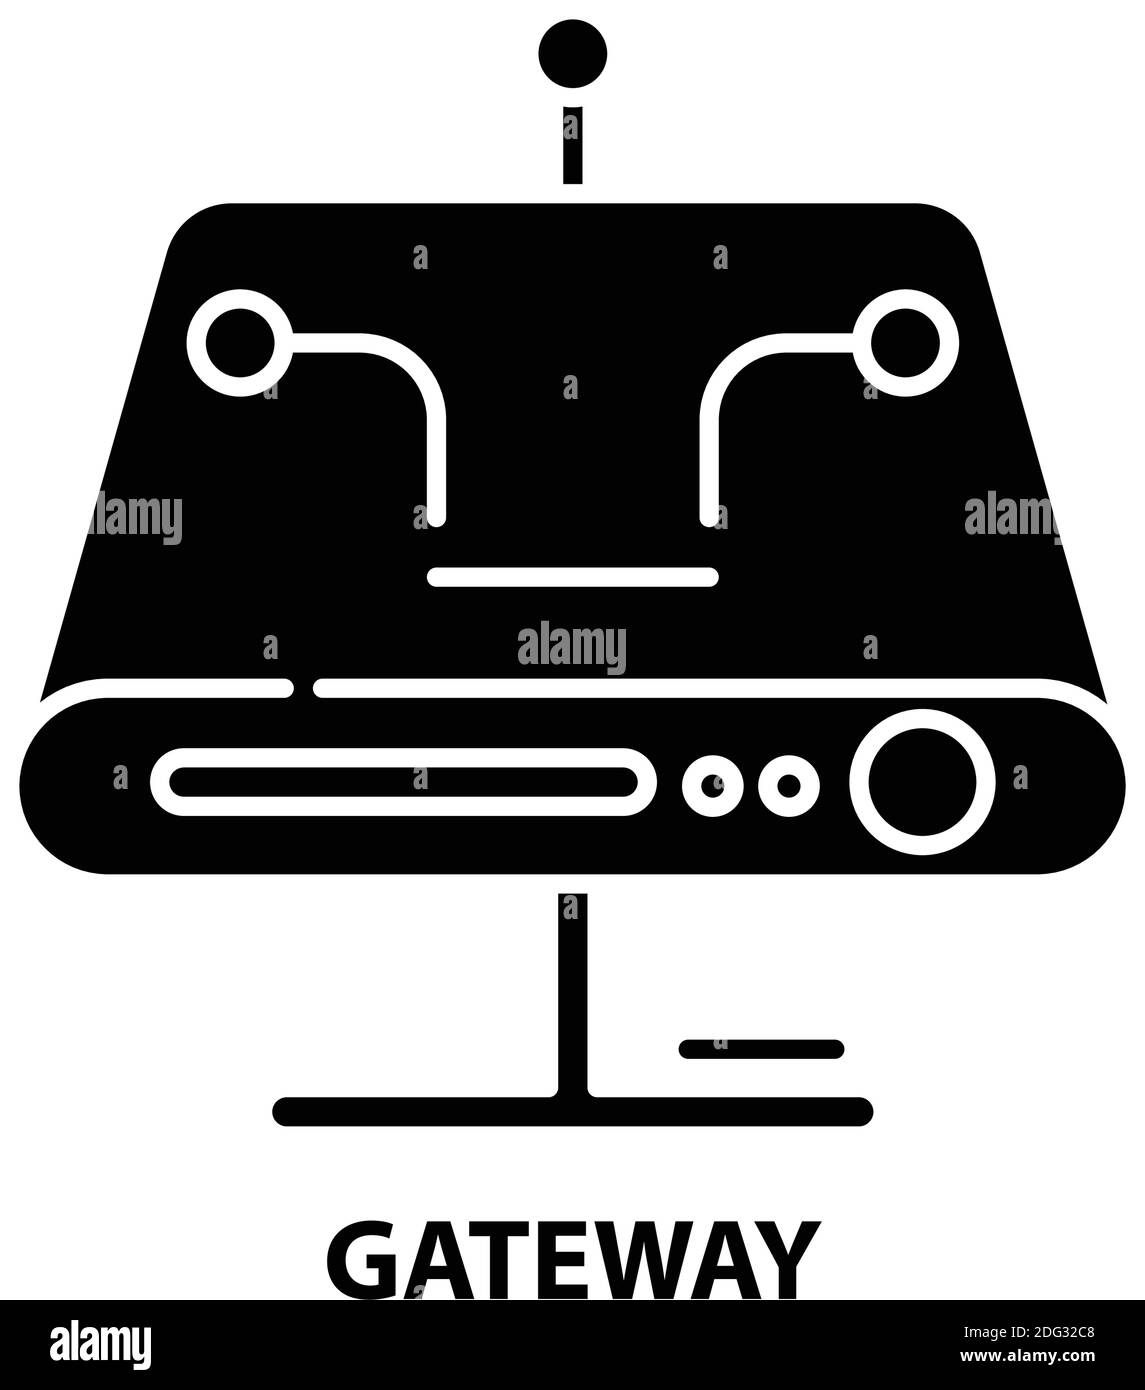 gateway icon, black vector sign with editable strokes, concept illustration Stock Vector